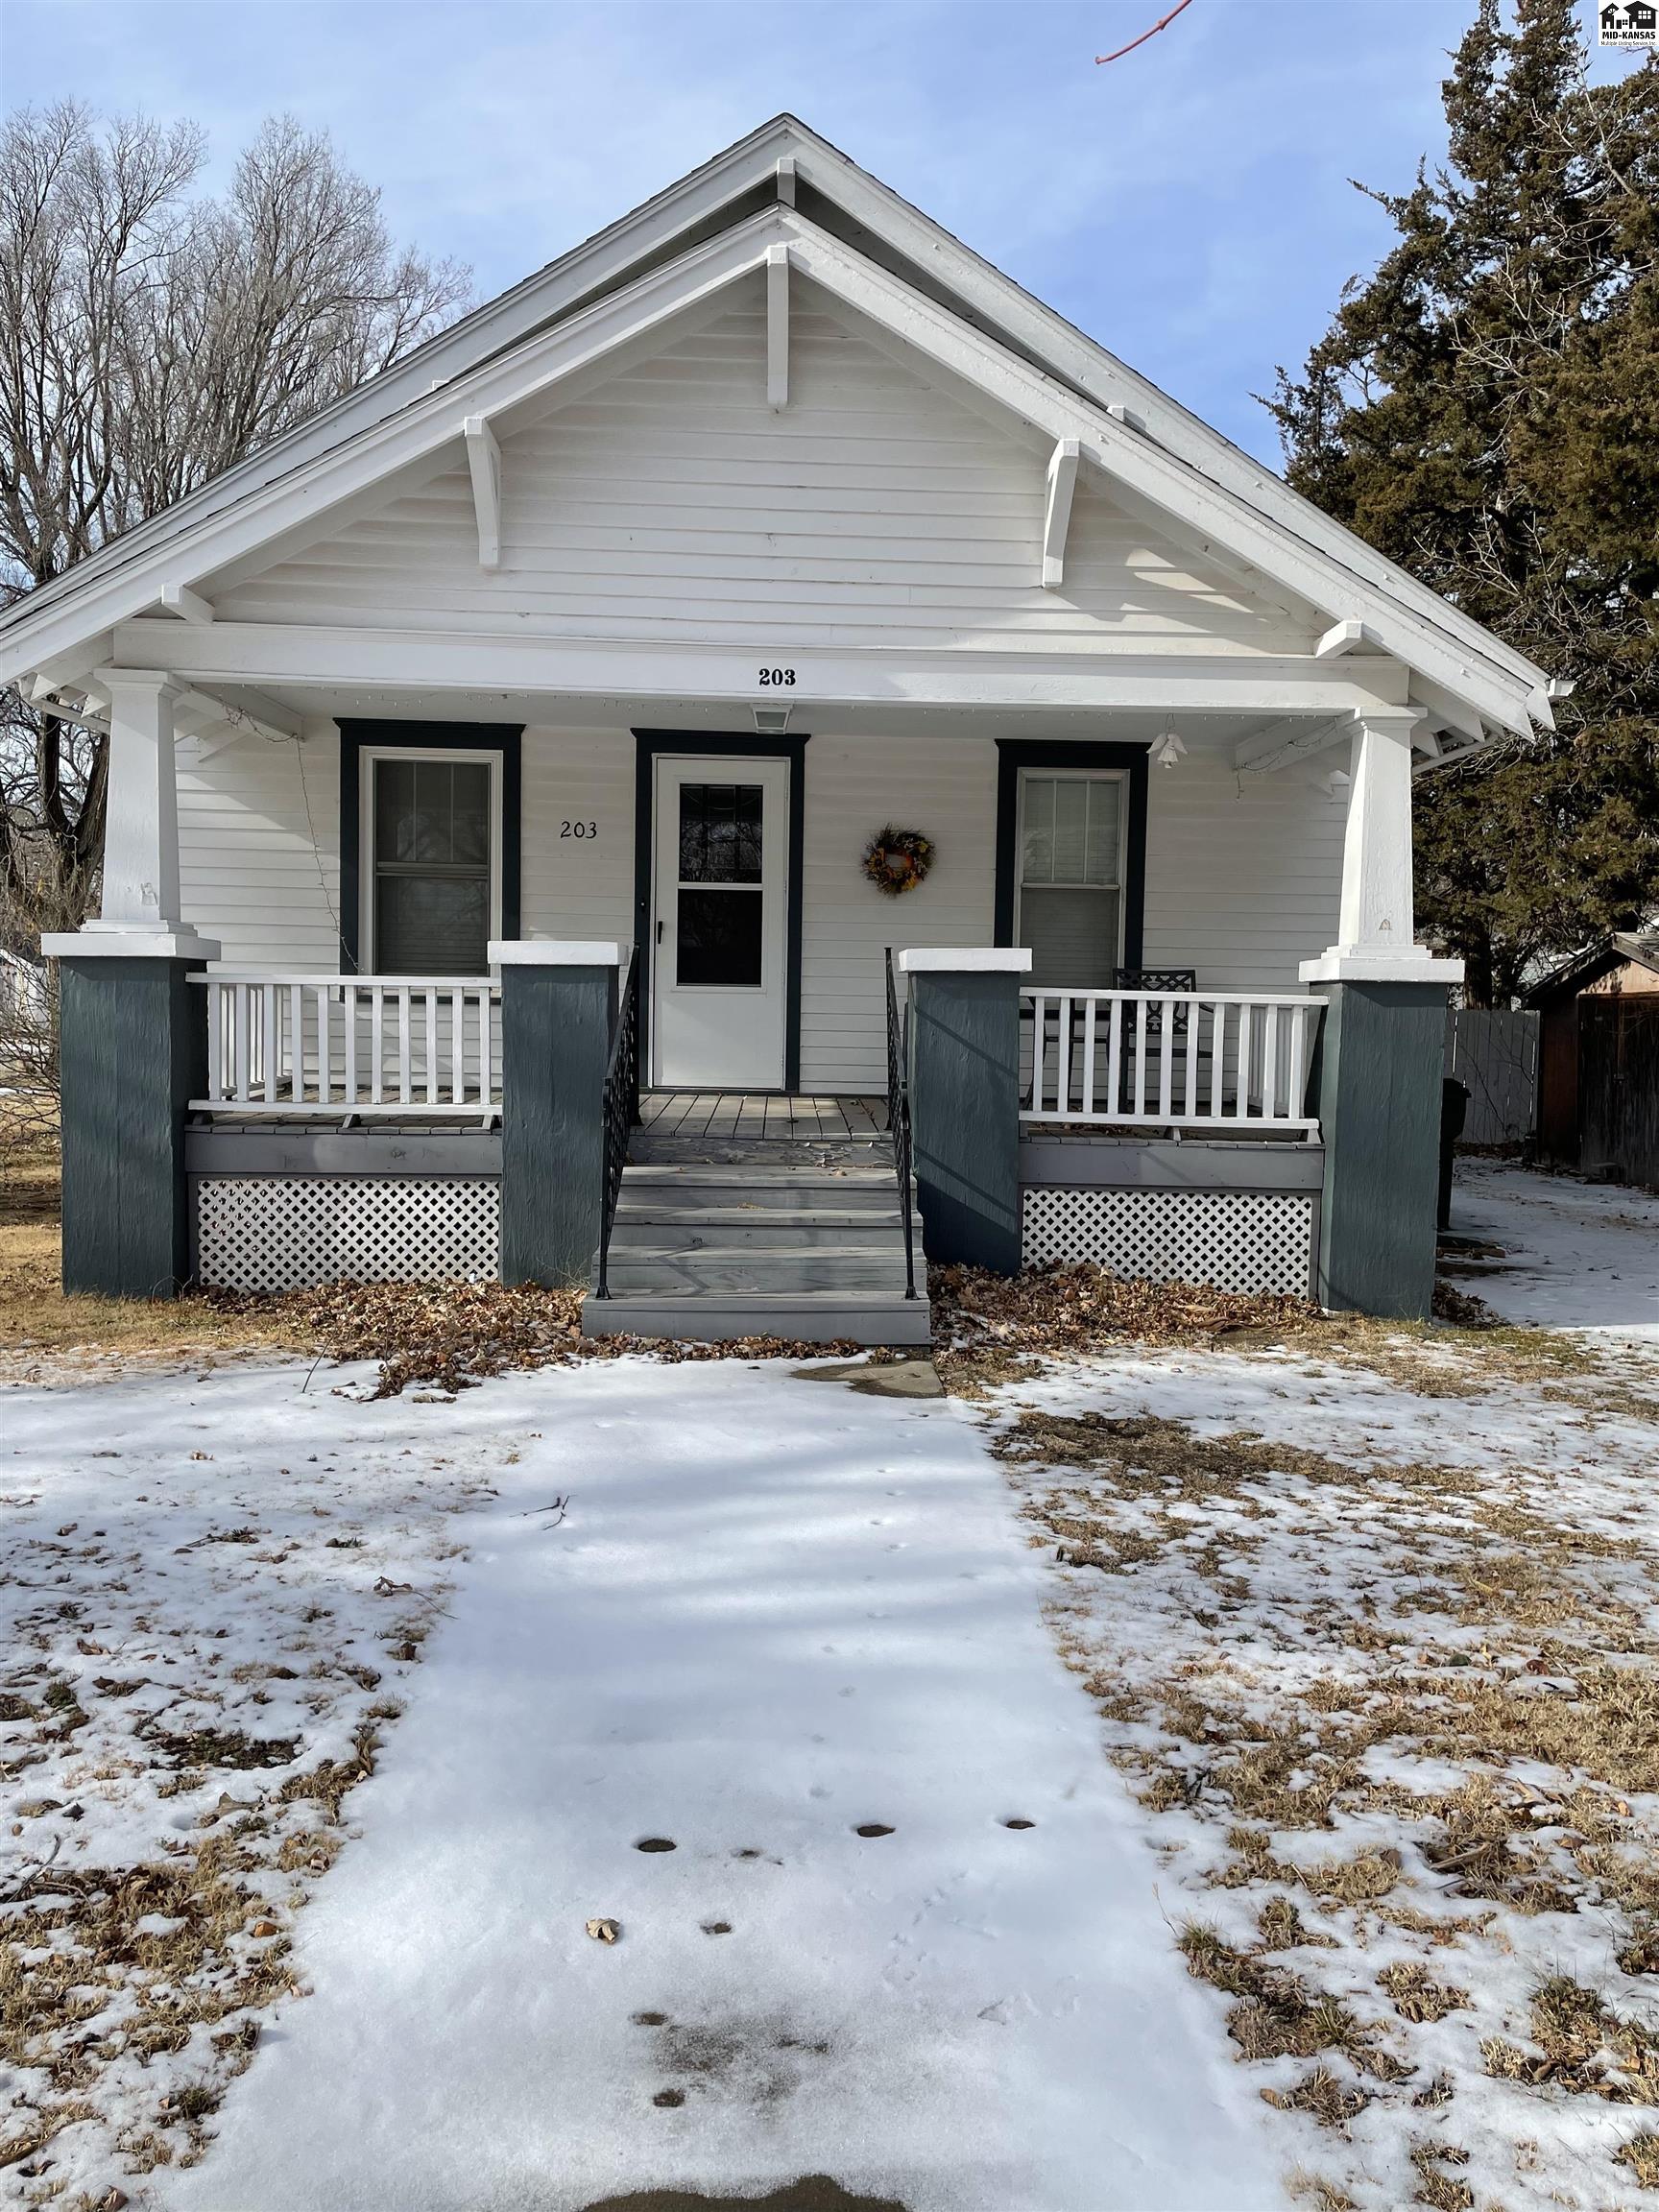 This Charming, clean, two bedroom, bungalow house with a large covered front porch in Sterling is a must see! Other perks is it has a large backyard with privacy fence, main floor laundry room, full basement for extra storage, and tankless water heater. The exterior was painted in 2018, roof replaced in 2016, and storage shed in backyard, new in 2016.